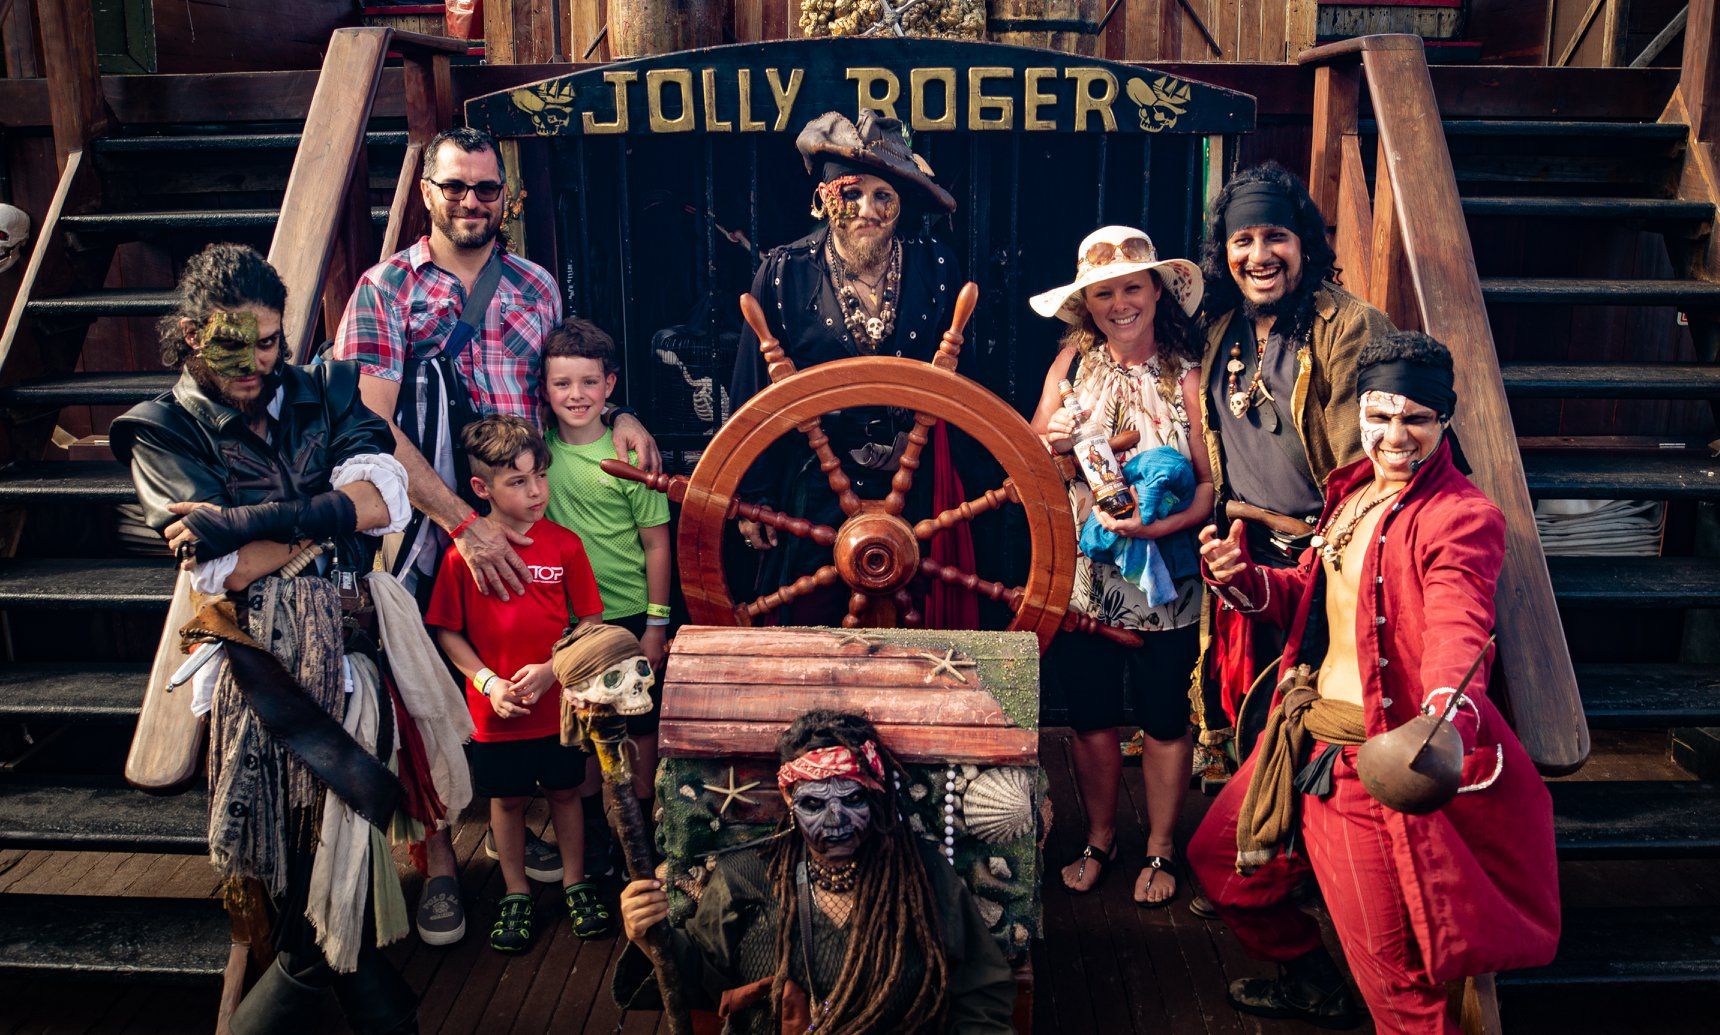 Pirate Dinner Show Deluxe Adventure with Jolly Roger